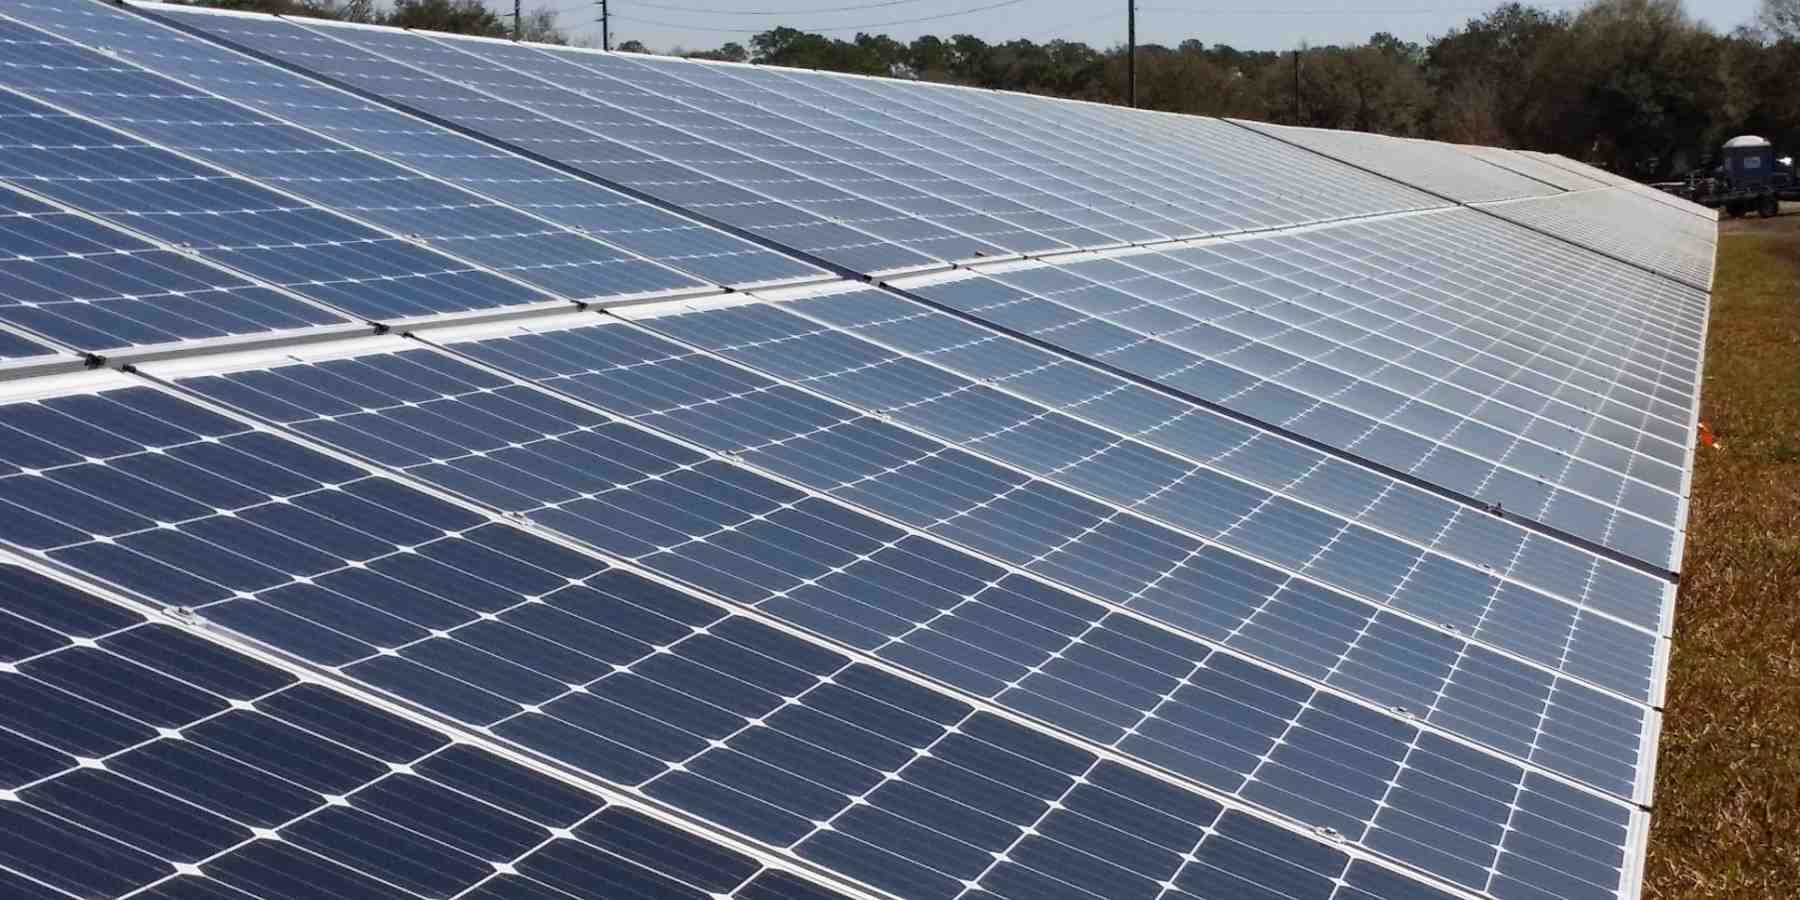 What is the Florida clean energy Association?